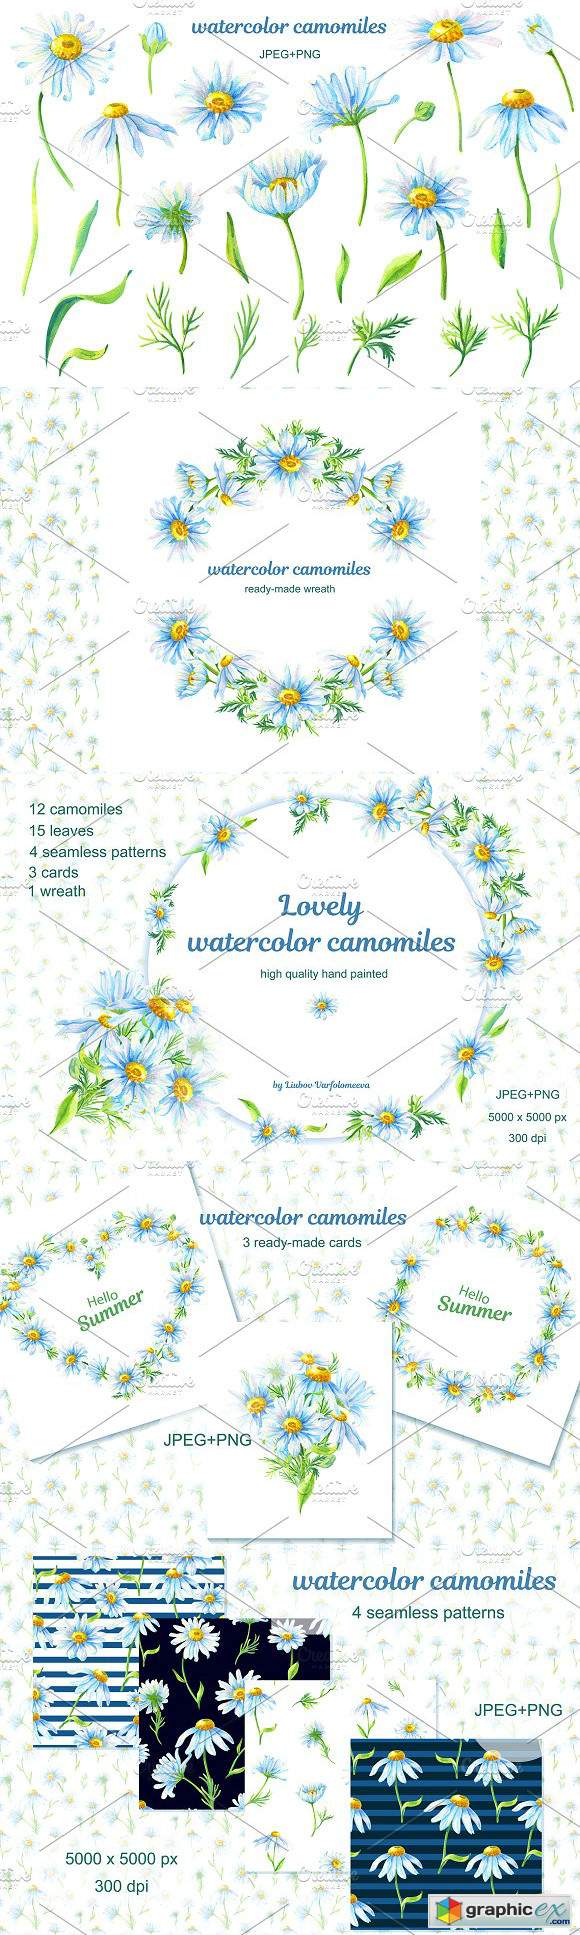 Lovely watercolor camomiles